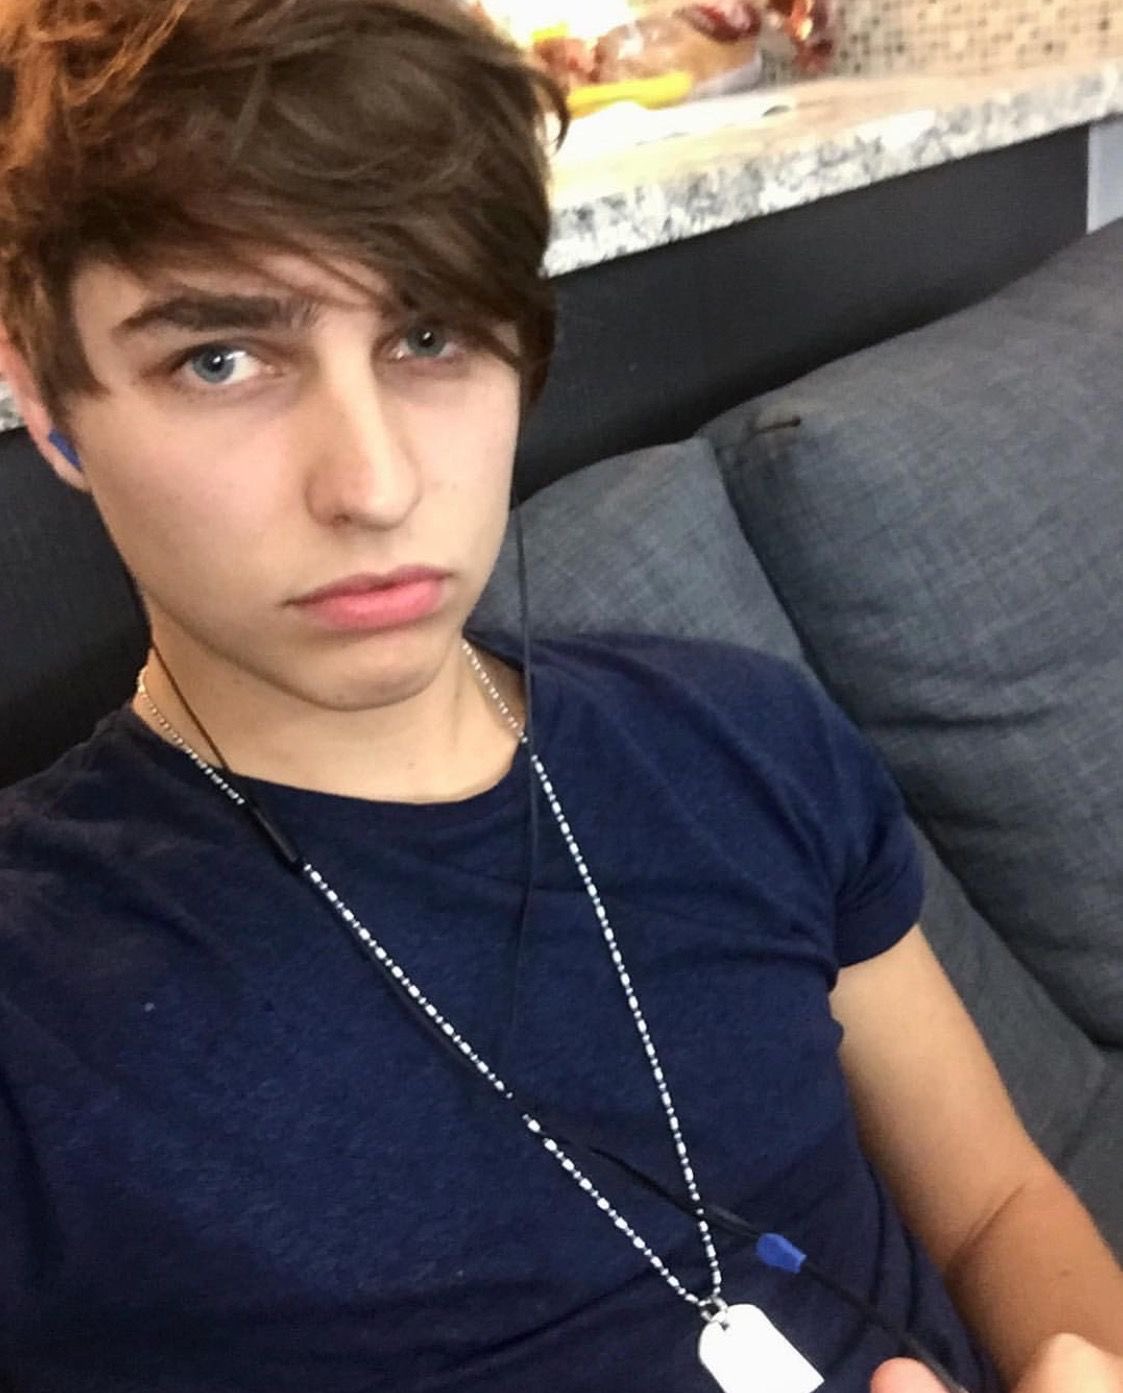 Pin by Kayleigh Grove on Colby Brock | Colby brock, Colby, Cross necklace